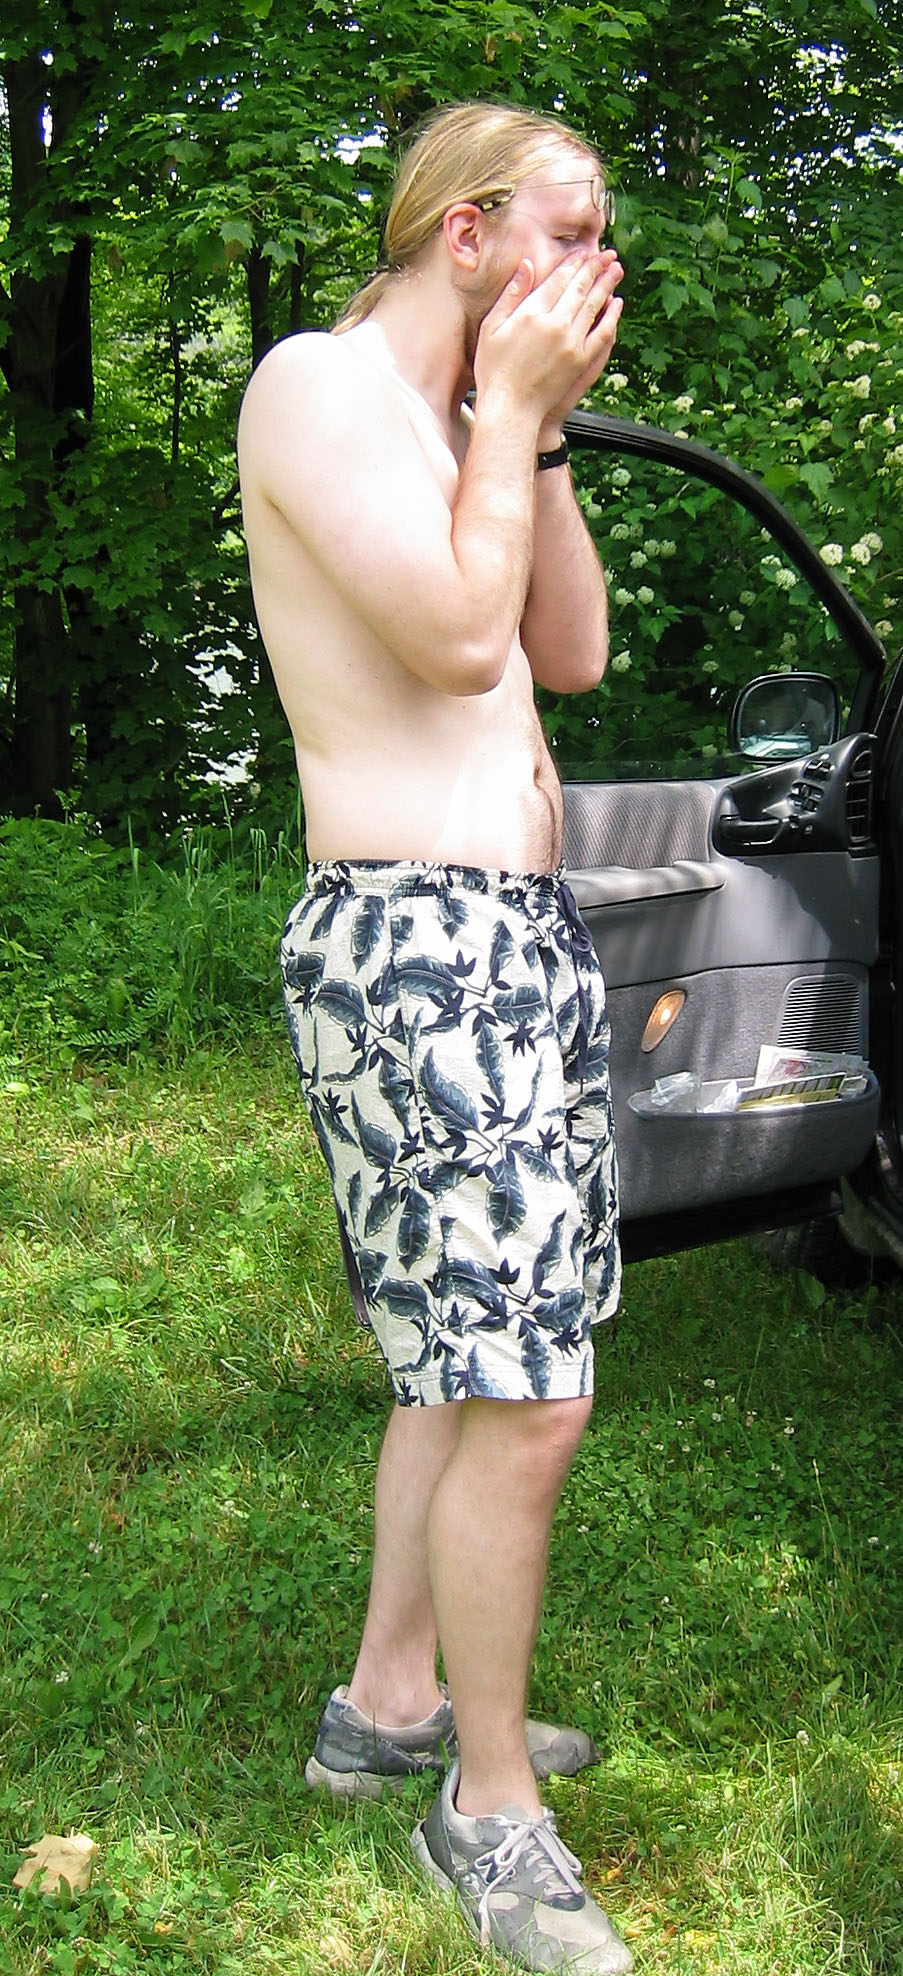 a shirtless man standing in front of a black truck